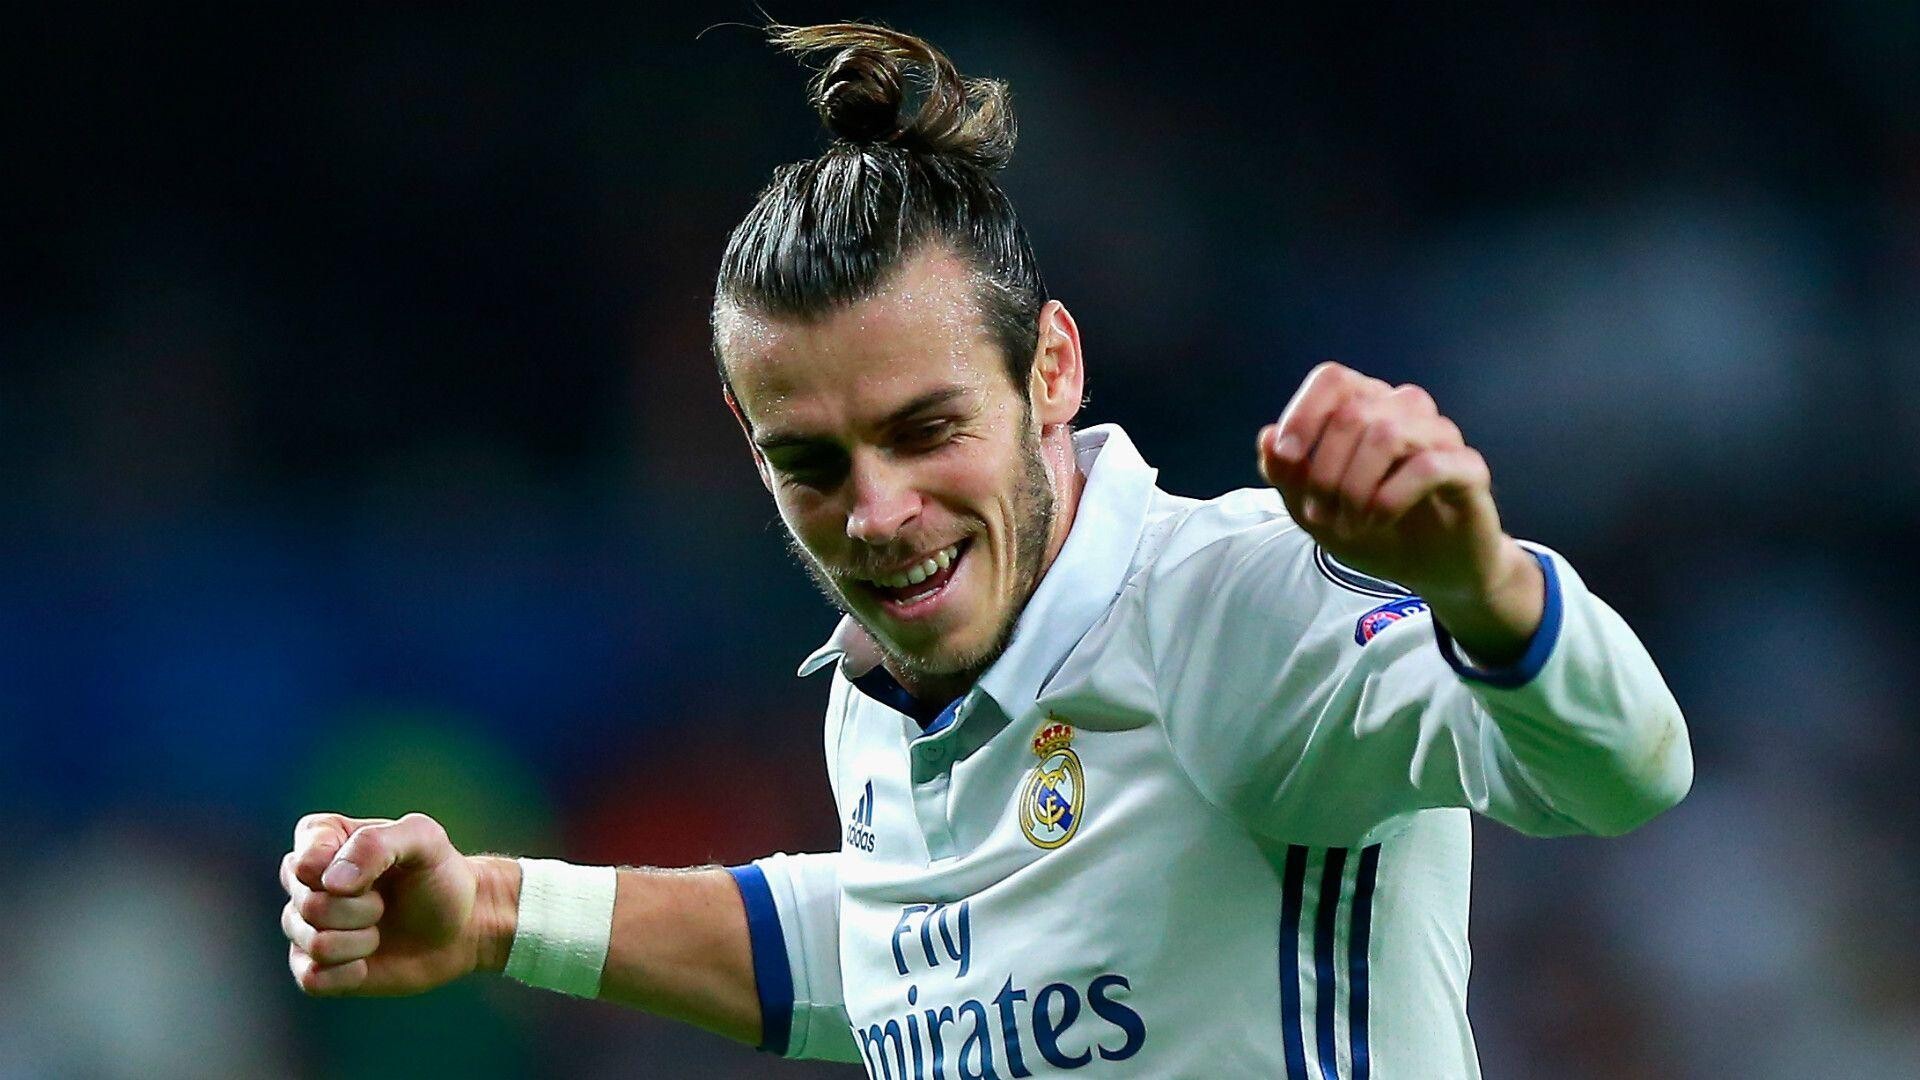 Gareth Bale: A former Real Madrid attacking winger who was born in Cardiff, One of the best footballers in the world. 1920x1080 Full HD Background.